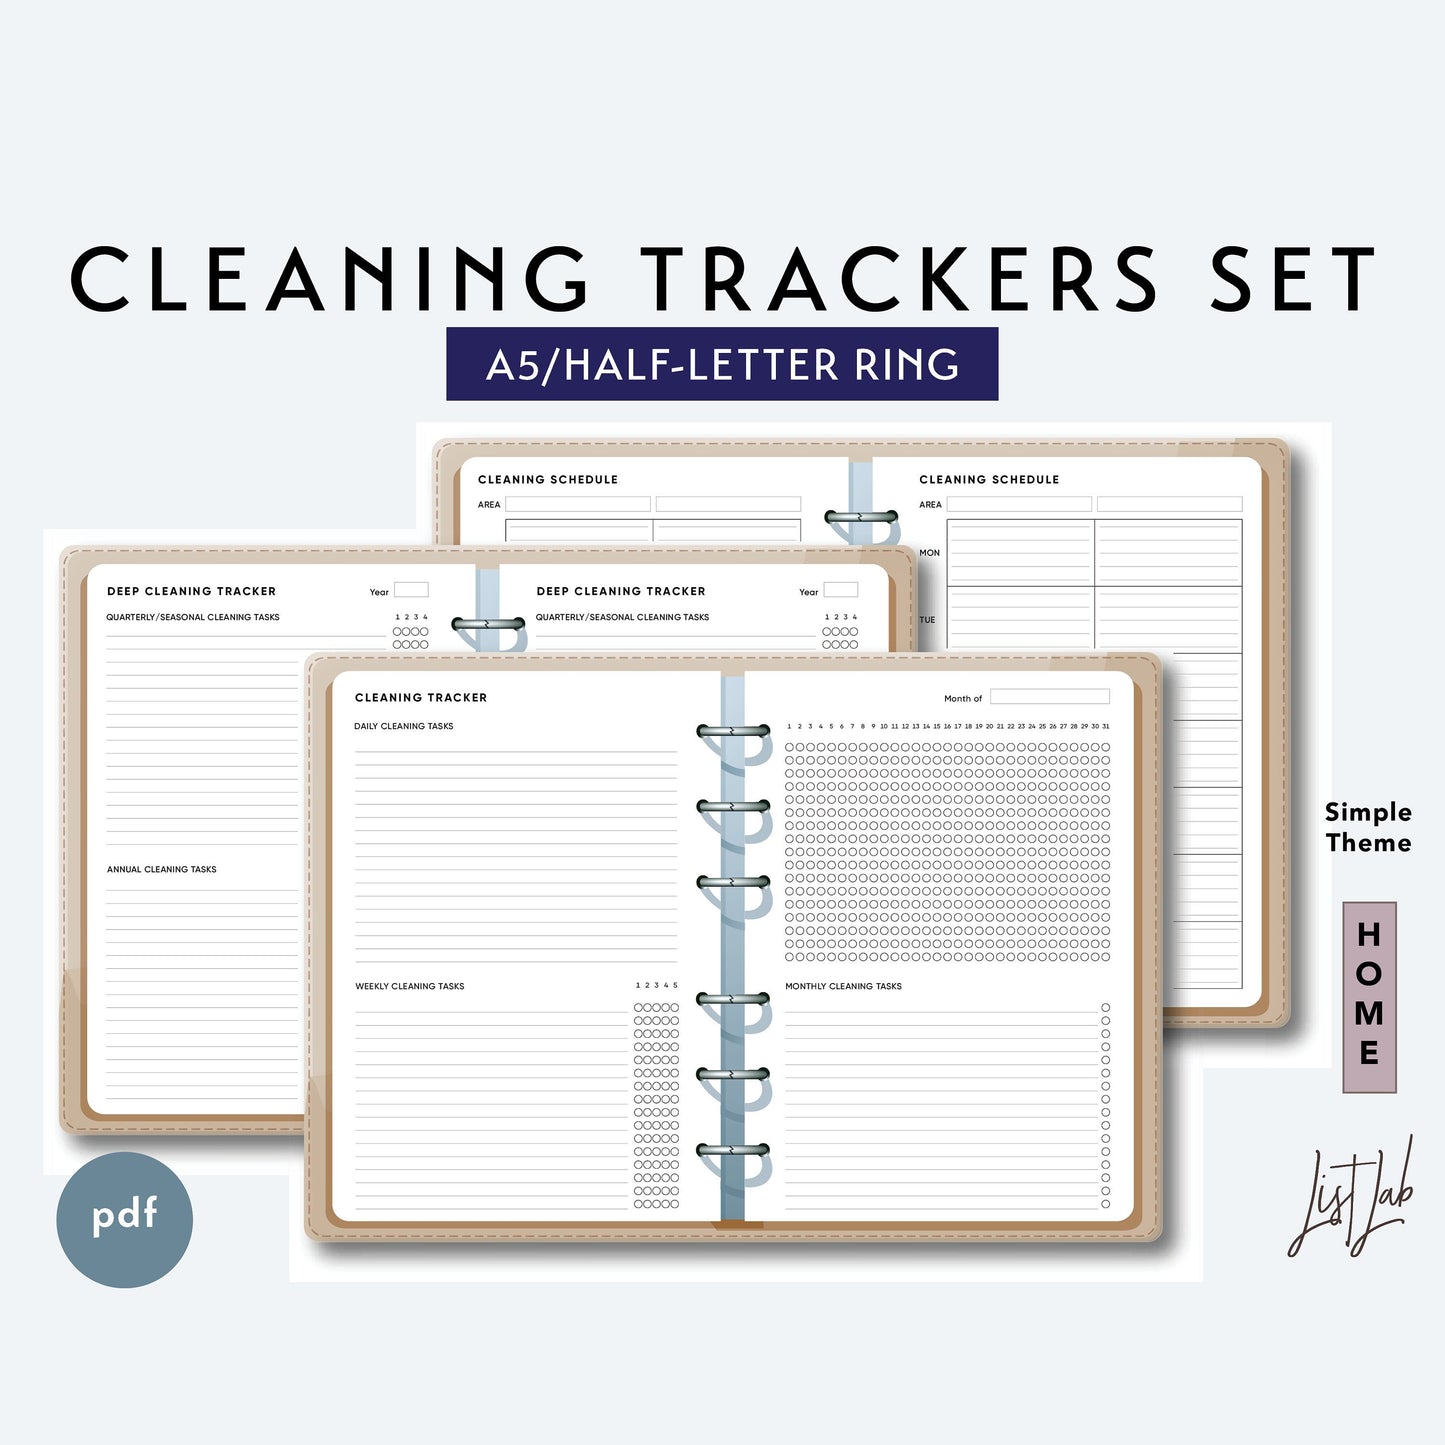 A5 / Half-Letter Ring CLEANING TRACKERS Printable Set